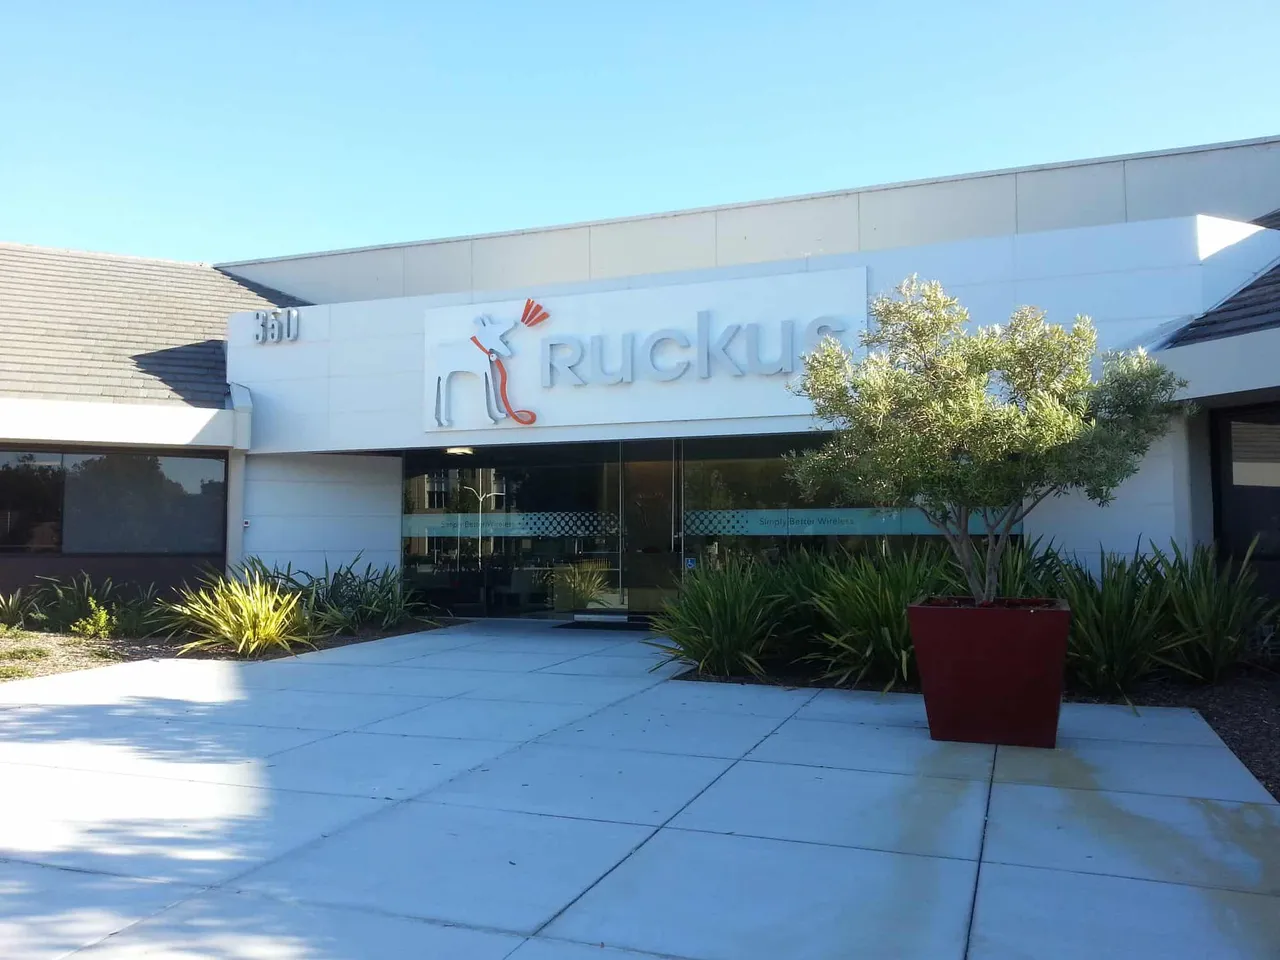 Ruckus has said the new specializations give partners extensive benefits and incentives opening up new sales and customer opportunities.